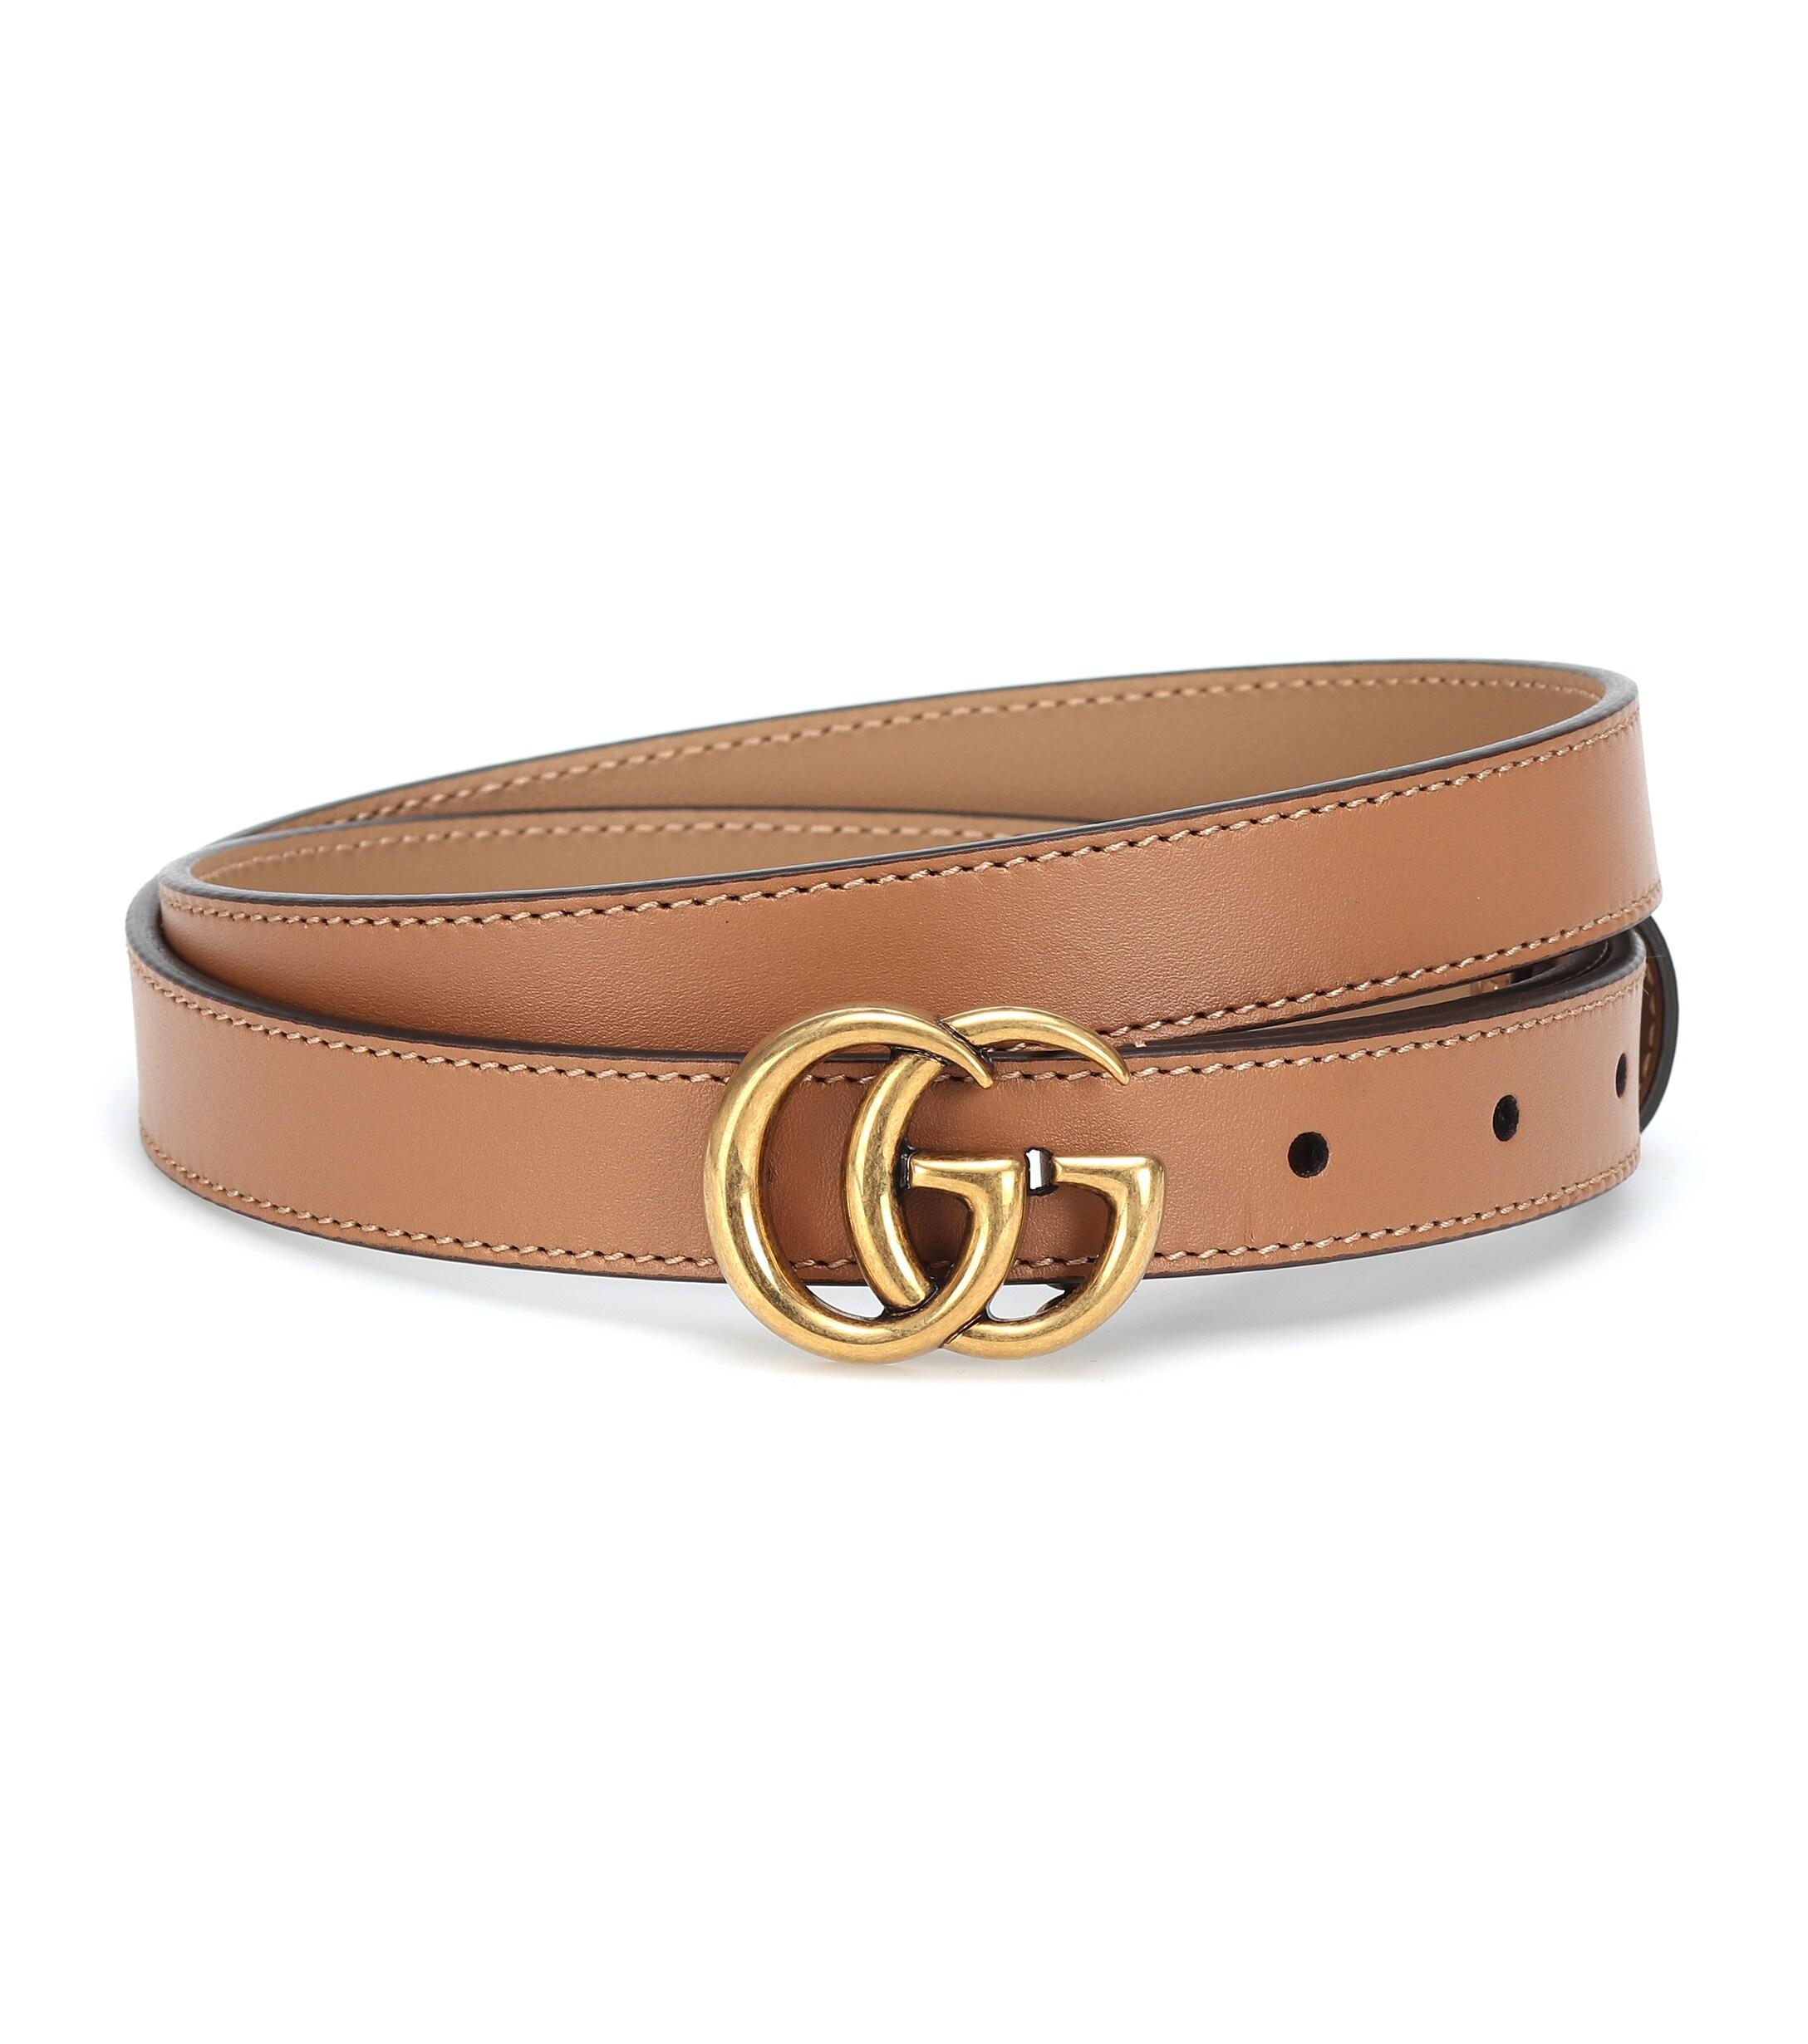 Gucci GG Leather Belt in Brown - Lyst